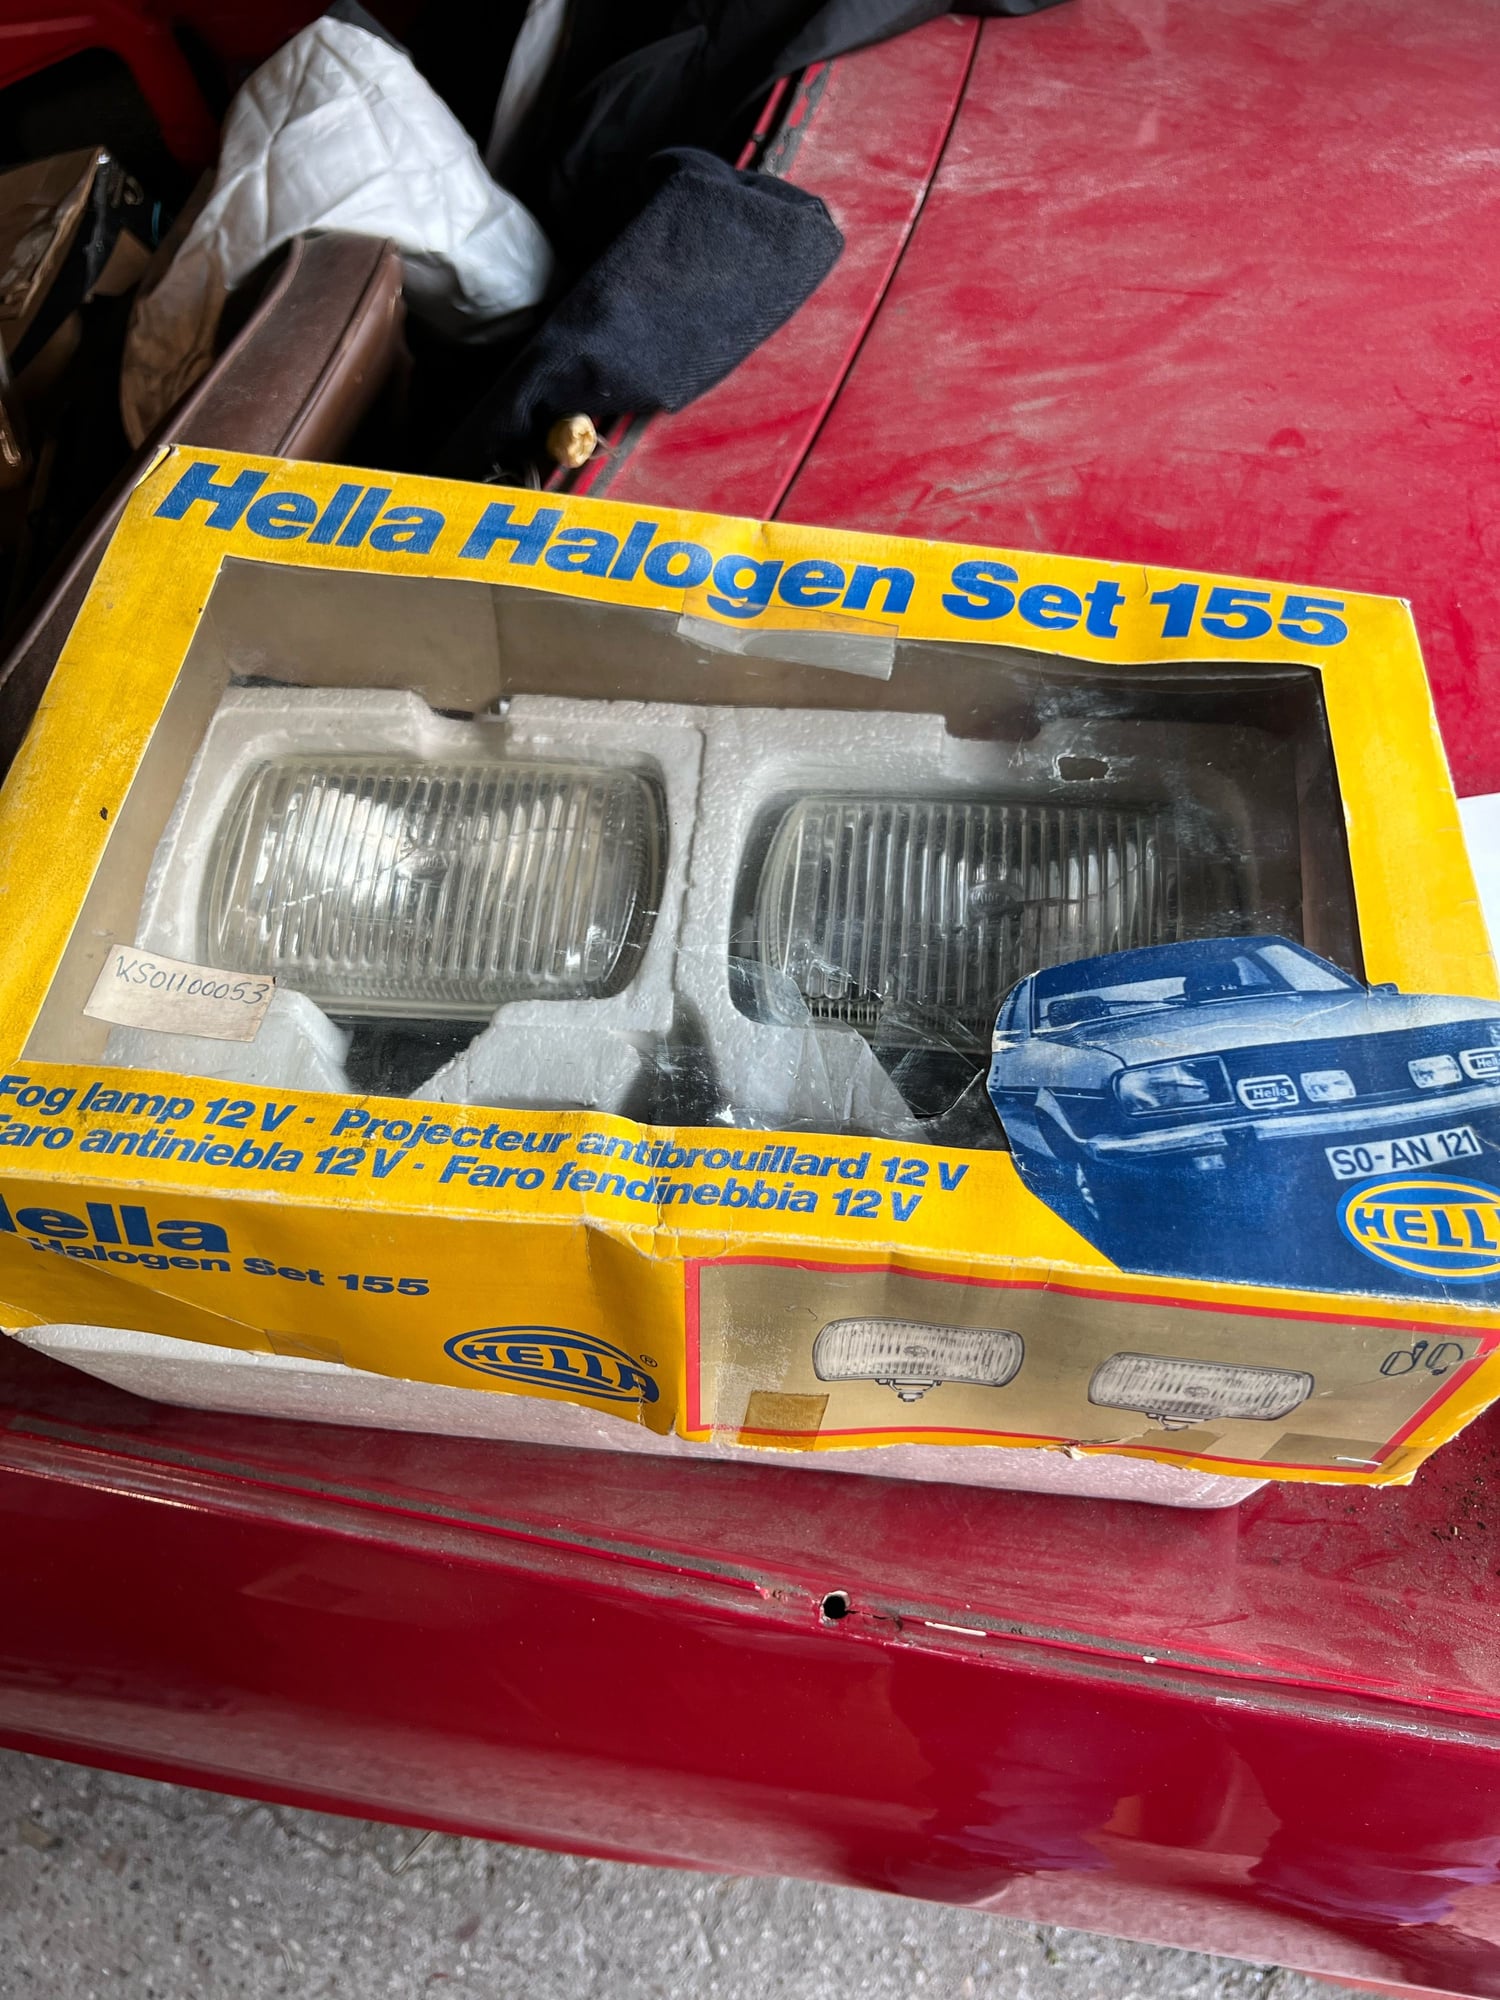 Lights - ***hella 155 fog lights w\box and covers!*** - Used - All Years Jaguar XJ6 - Woodhaven, NY 11421, United States